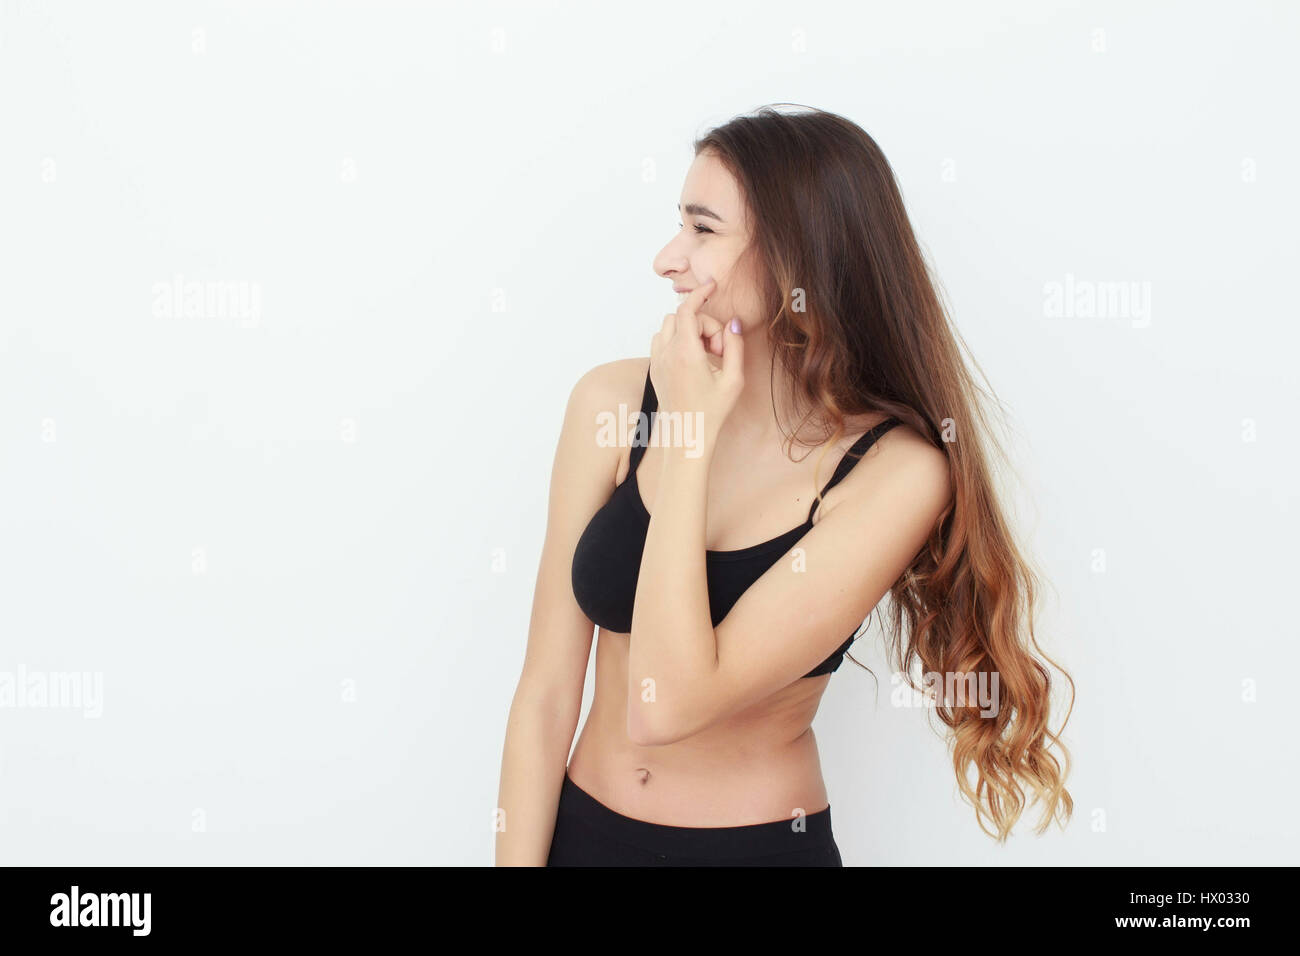 Beautiful girl in black top on white background shows emotion Stock Photo